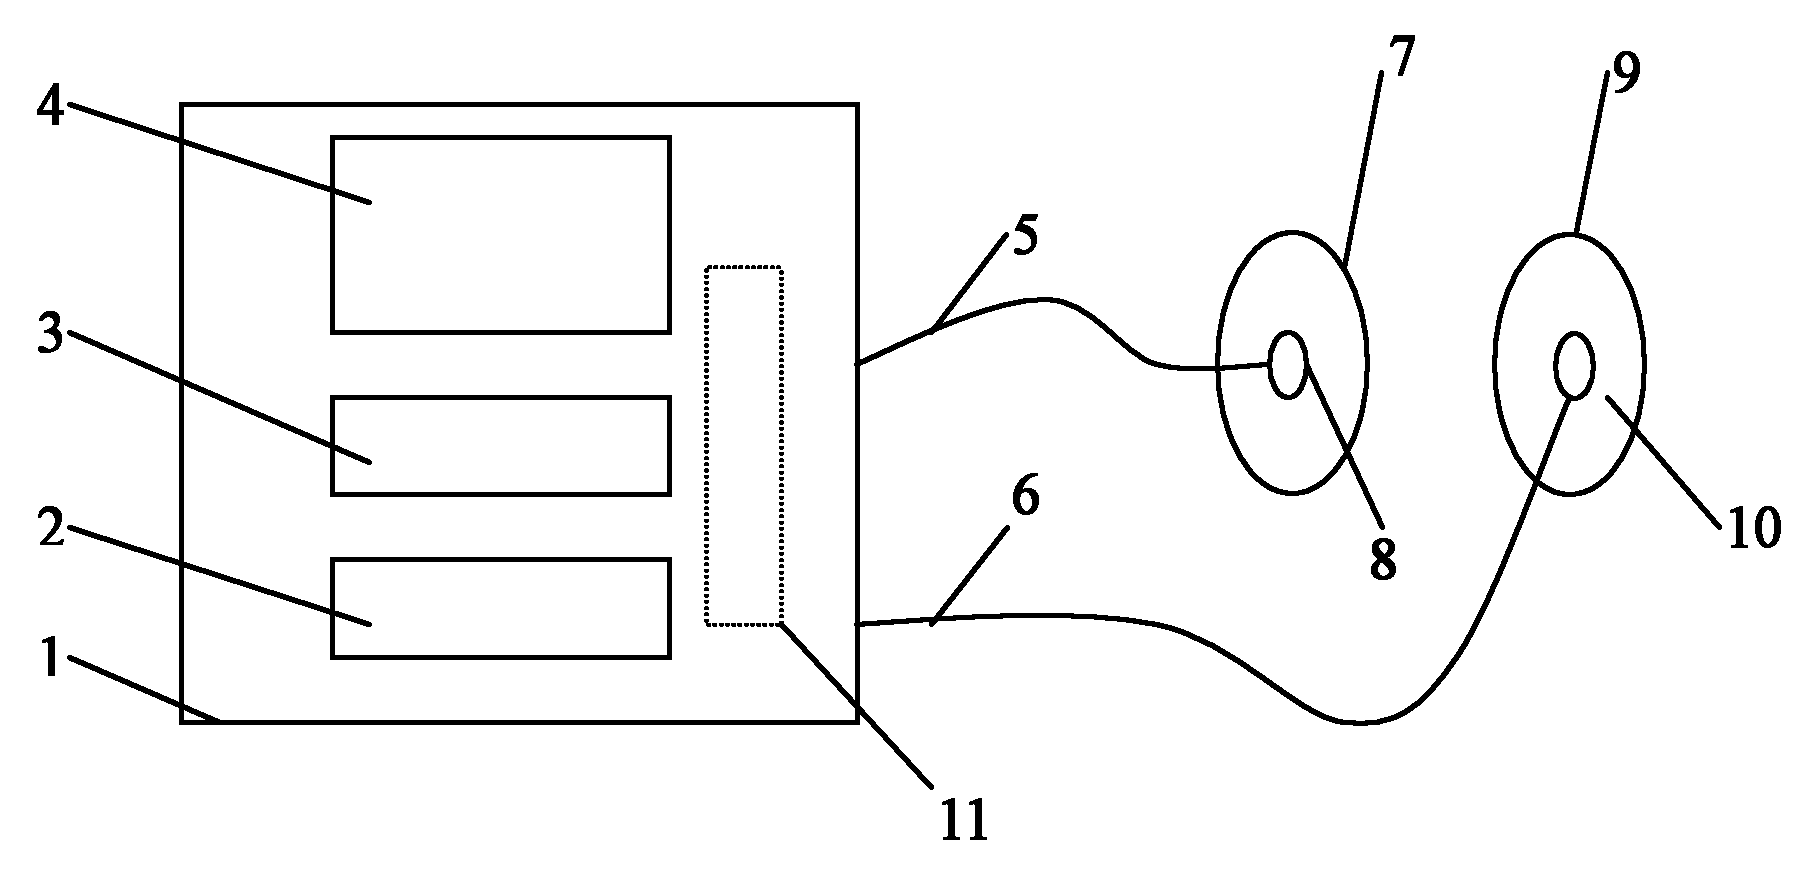 Patch instrument for accelerating wound paining curing